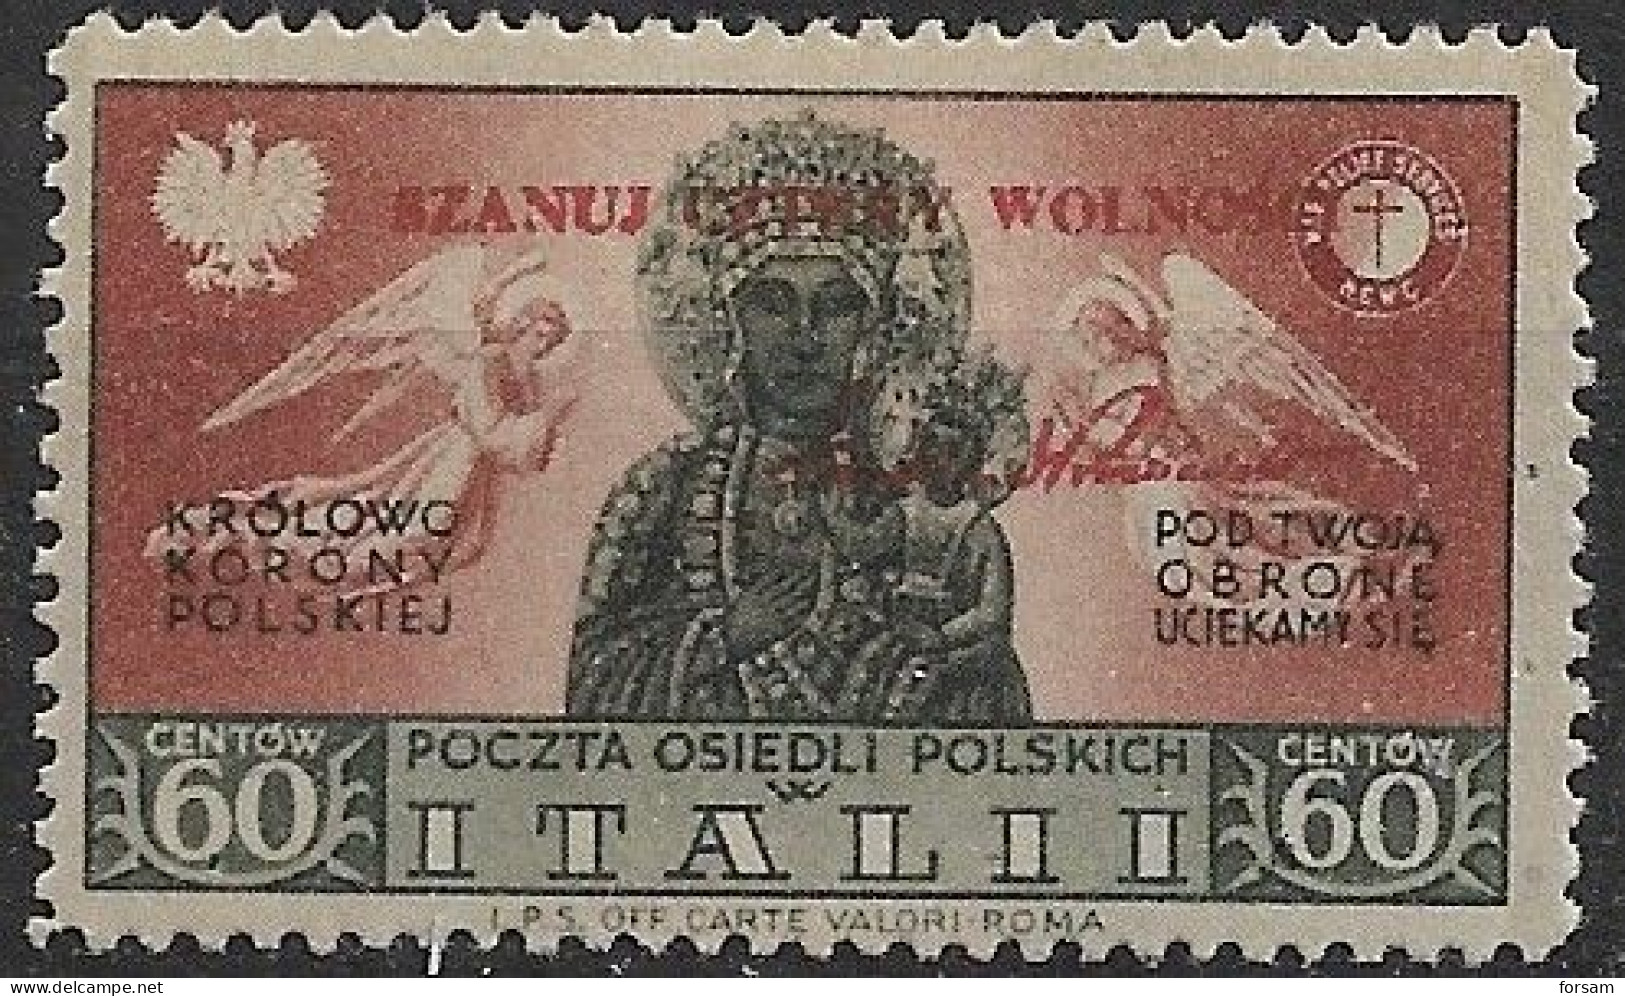 POLAND..1944-1945..2nd CORPS In ITALY WWII...MNH. - Gobierno De Londres (En Exhilio)